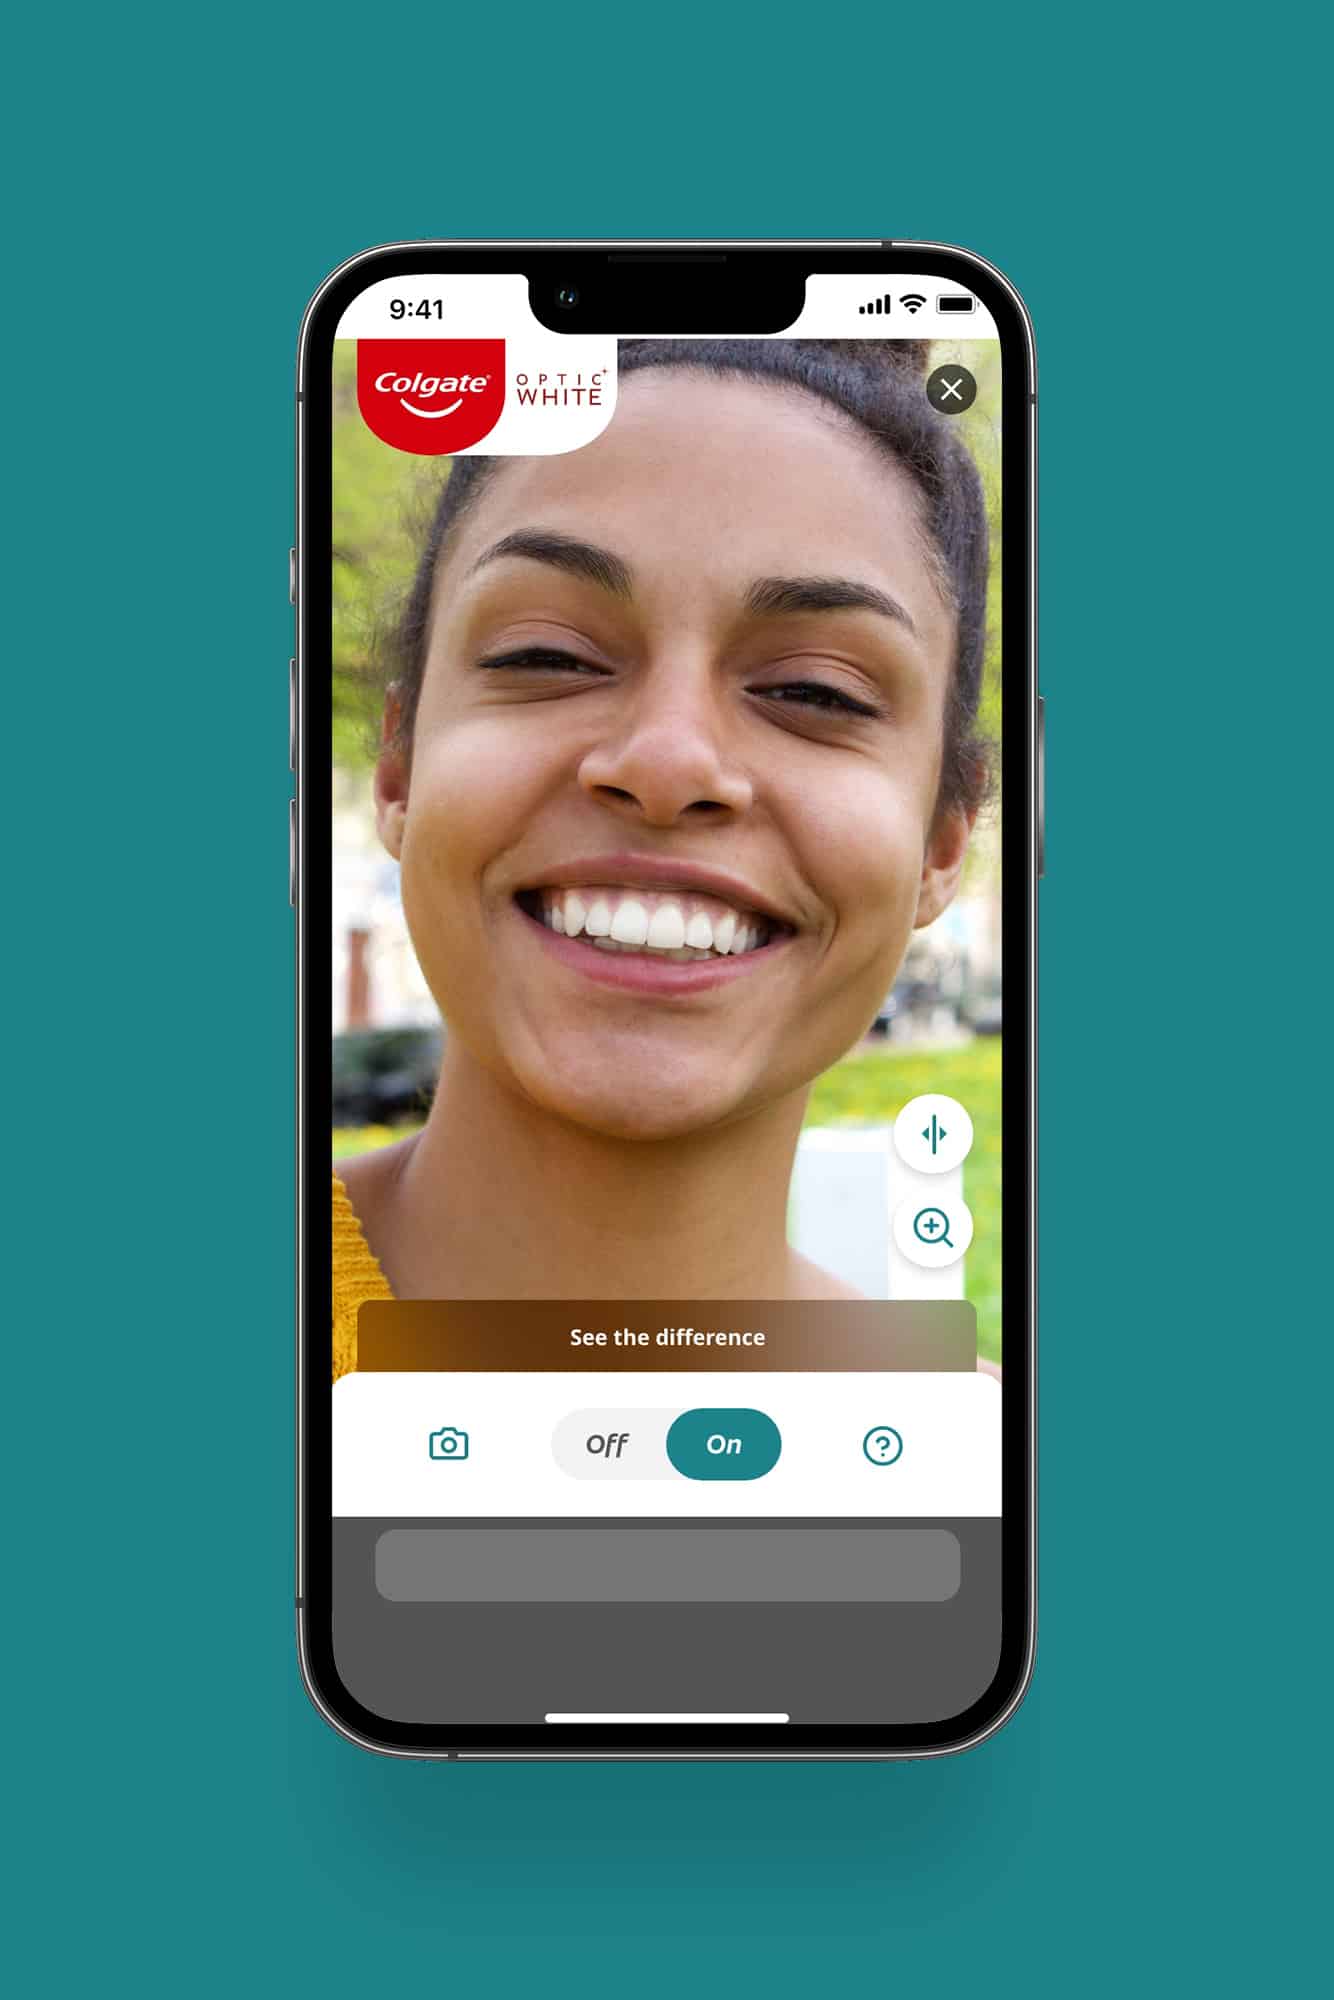 Colgate Whitening Augmented Reality